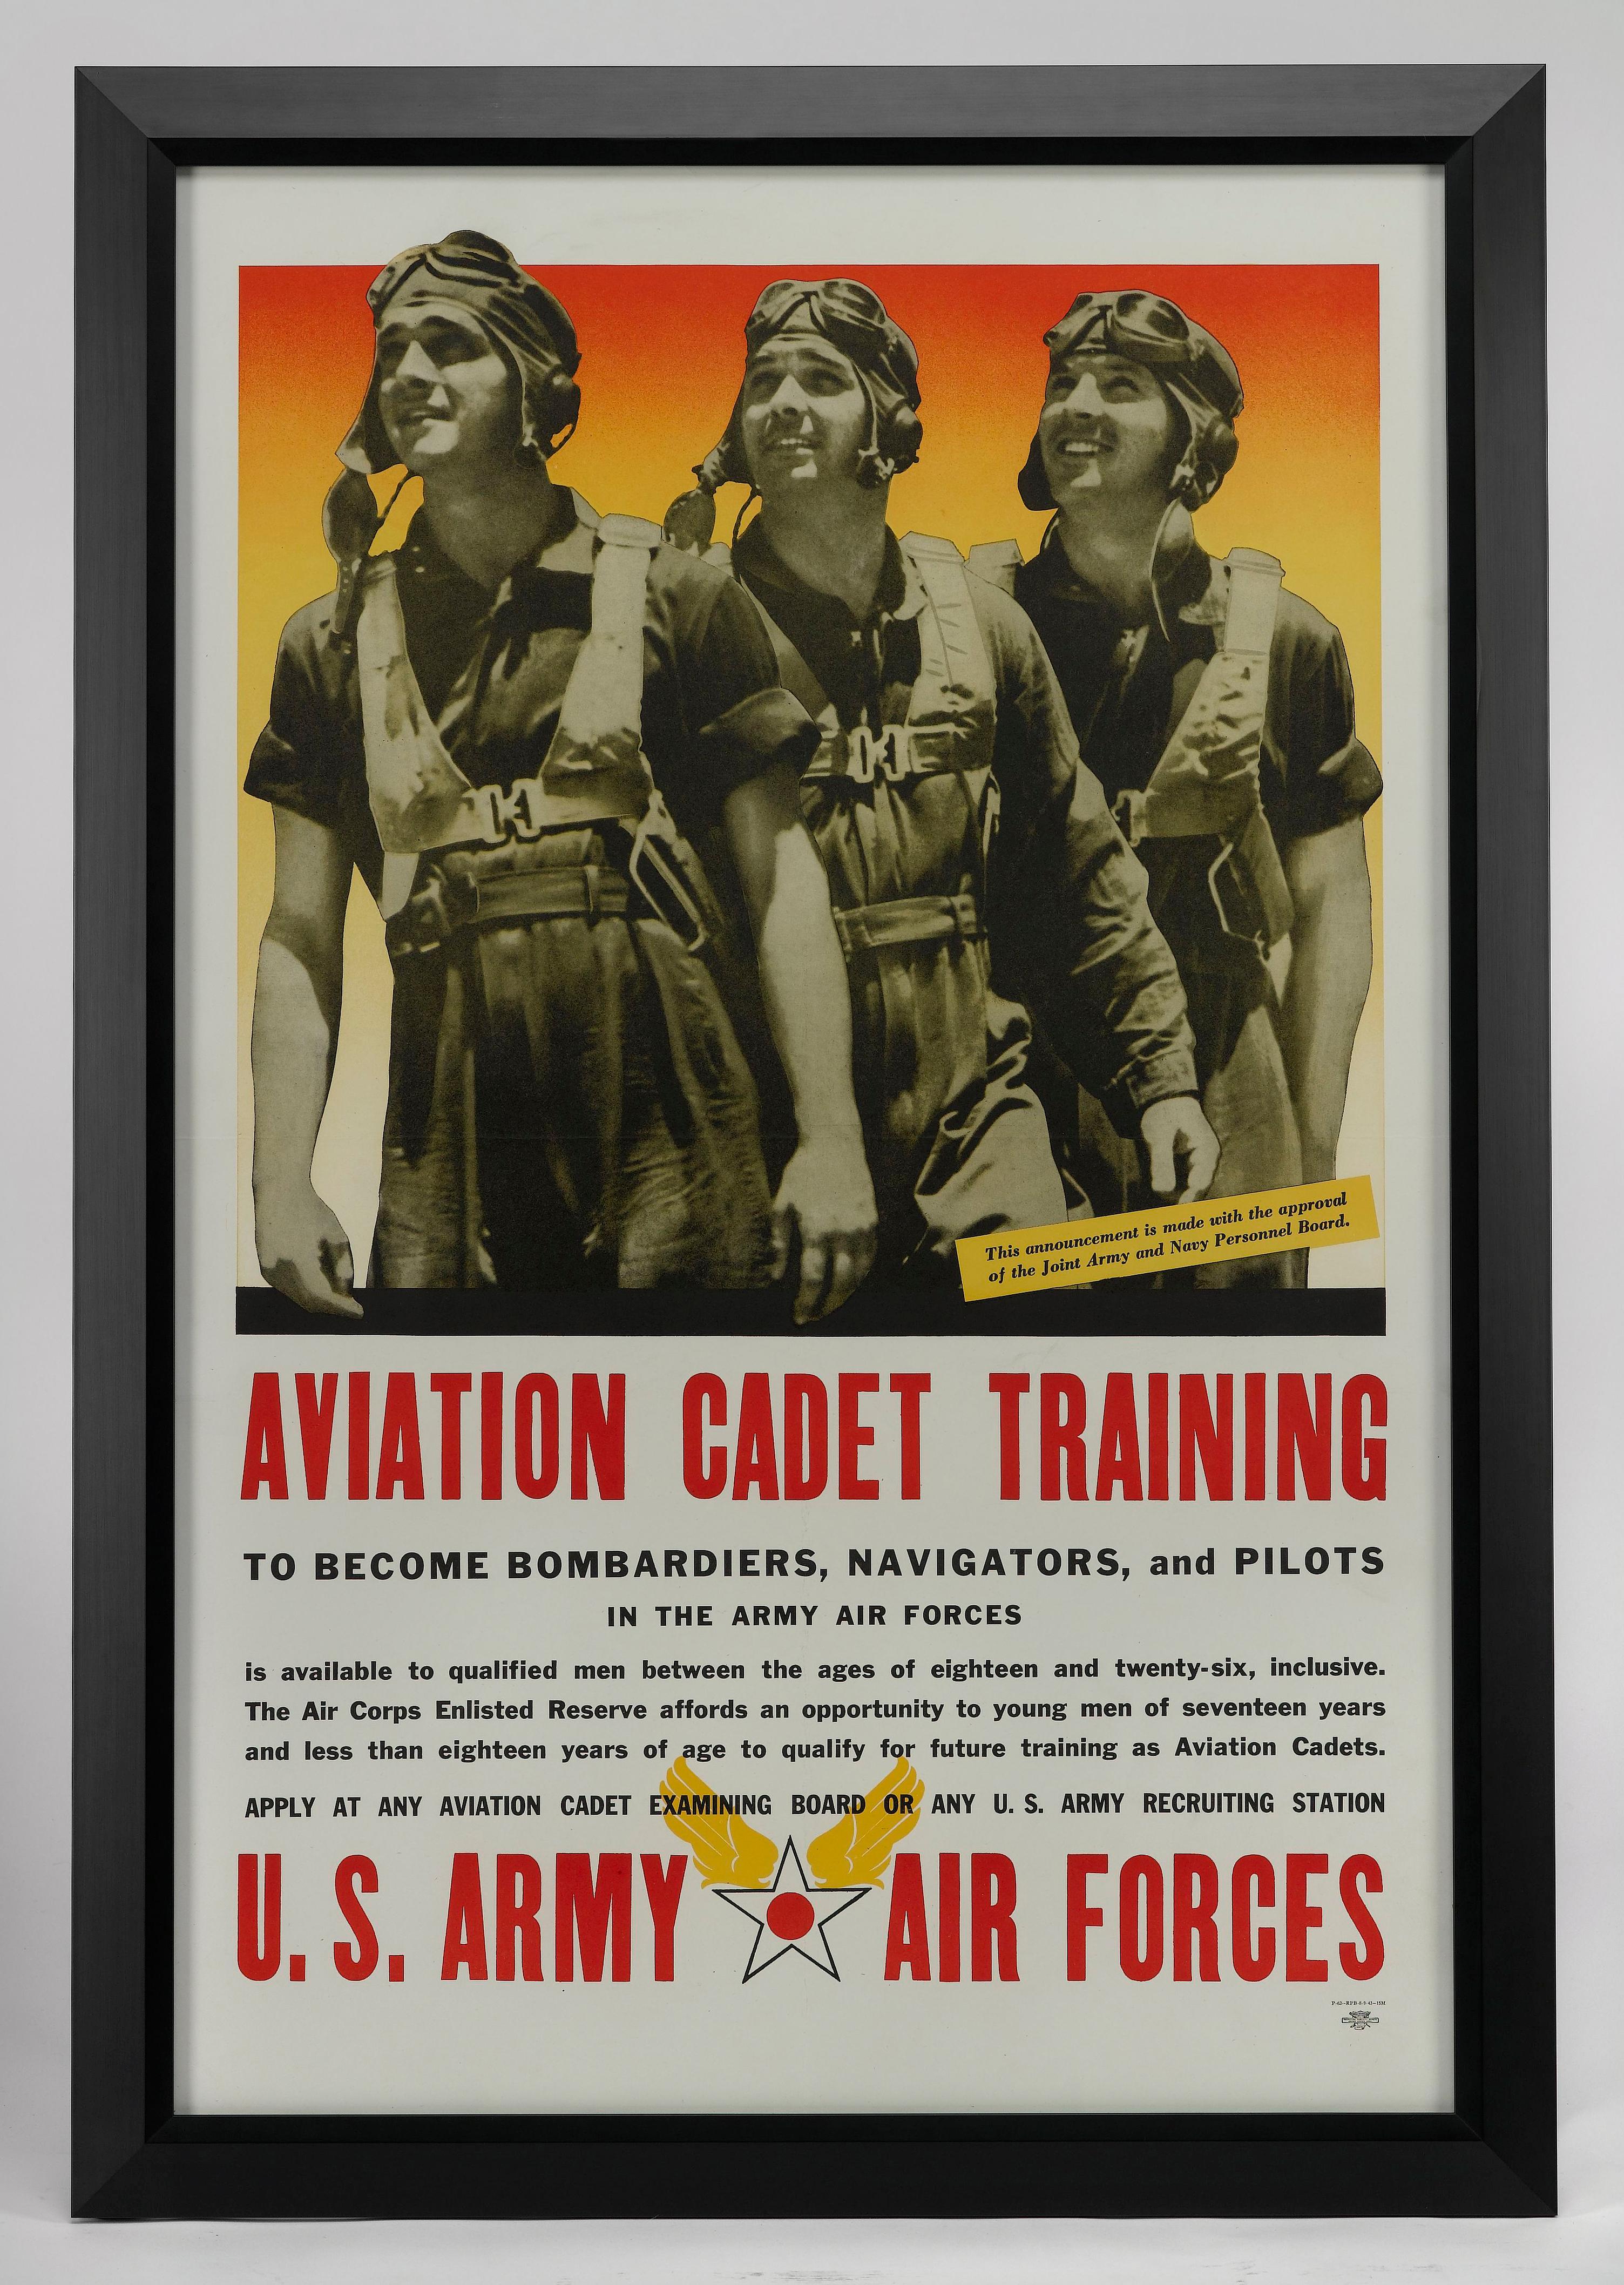 Presented is a vintage U.S. Army Air Forces recruitment poster from WWII. The poster was published in August of 1943 by the Recruiting Publicity Bureau. The poster depicts three young men in flight suits, having proudly answered the call to serve